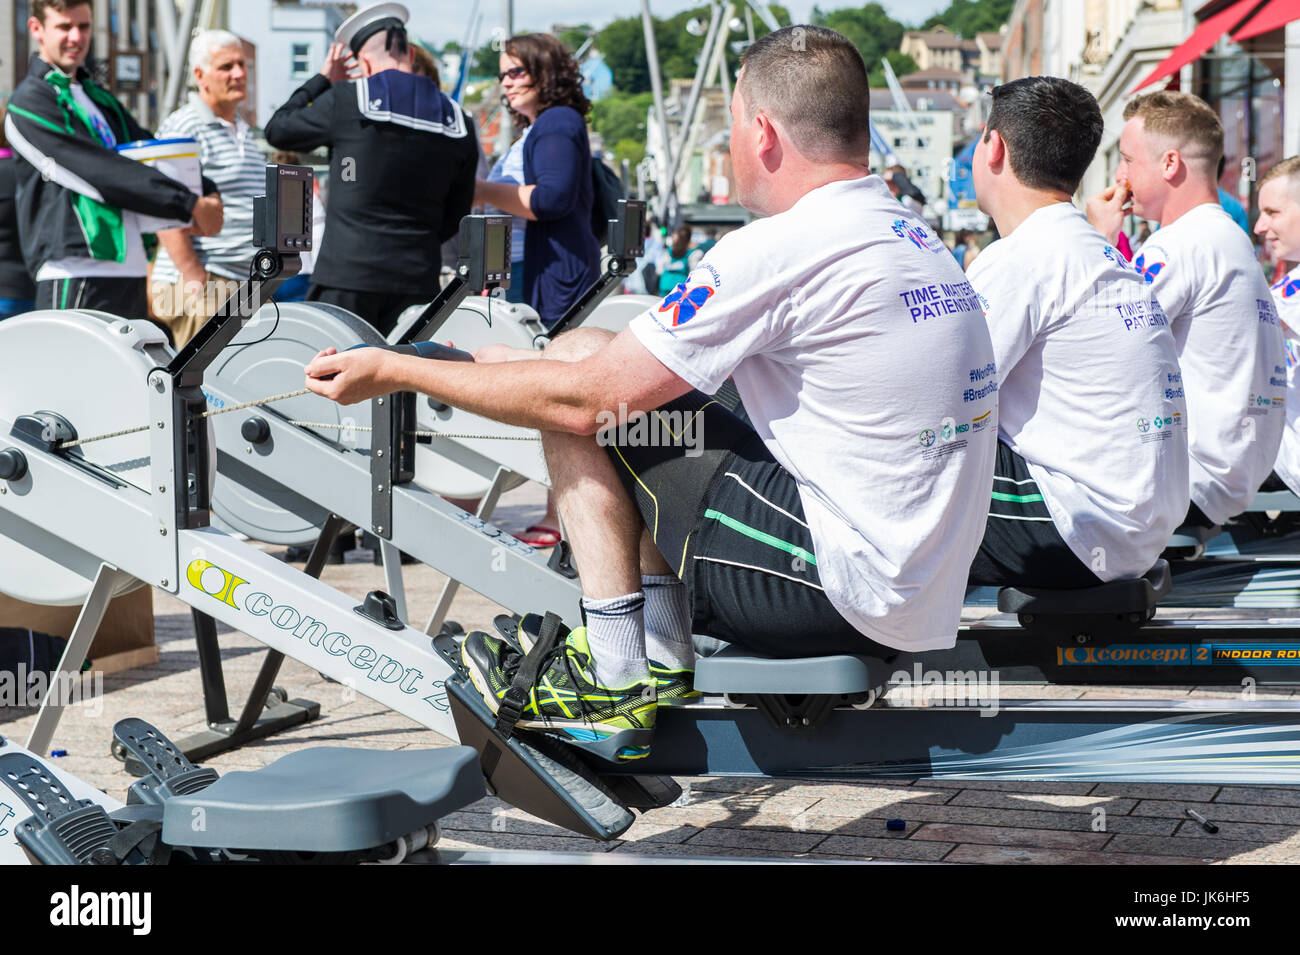 Cork, Ireland. 22nd July, 2017.  The Irish Navy did a charity row in aid of Pulmonary Hypertension Ireland today.  The illness is extremely rare, with only 150 known cases in Ireland. There is no cure for the illness, only treatment.  Credit: Andy Gibson/Alamy Live News. Stock Photo